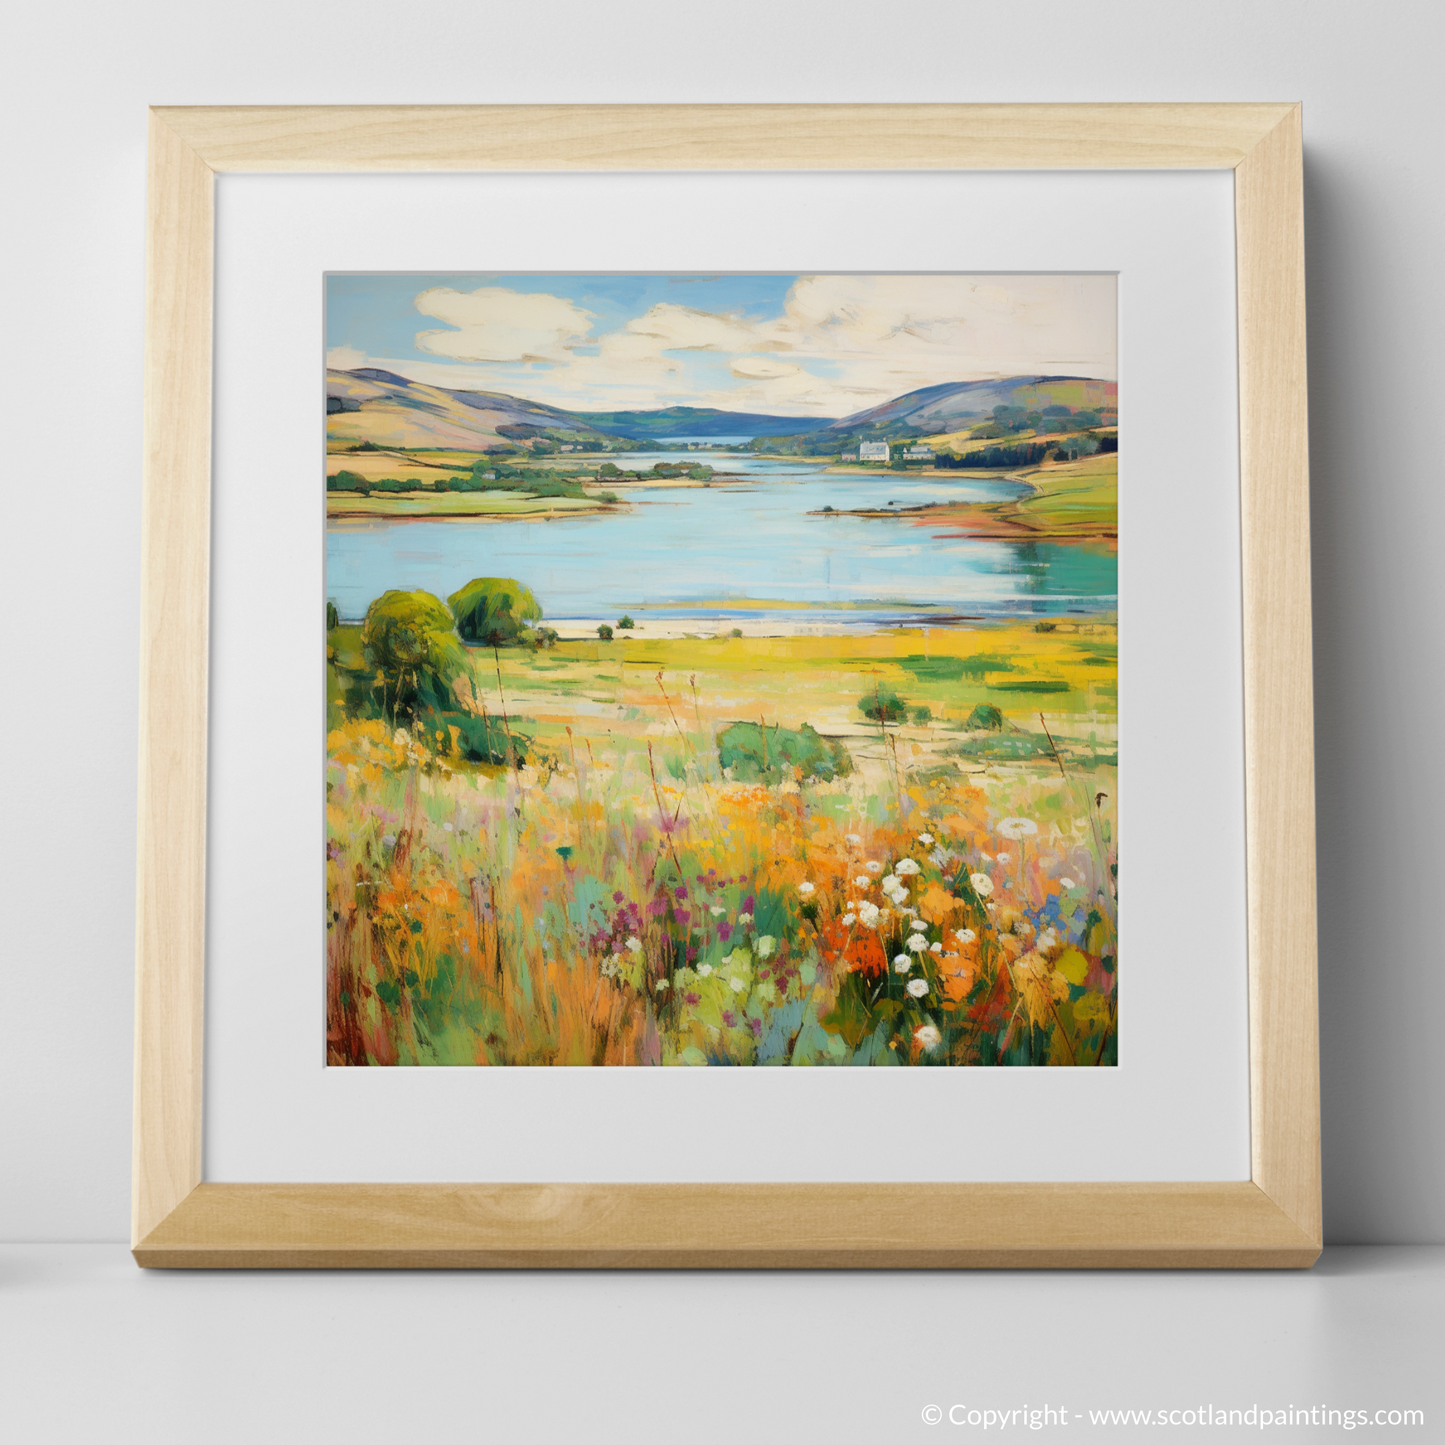 Art Print of Loch Leven, Perth and Kinross in summer with a natural frame